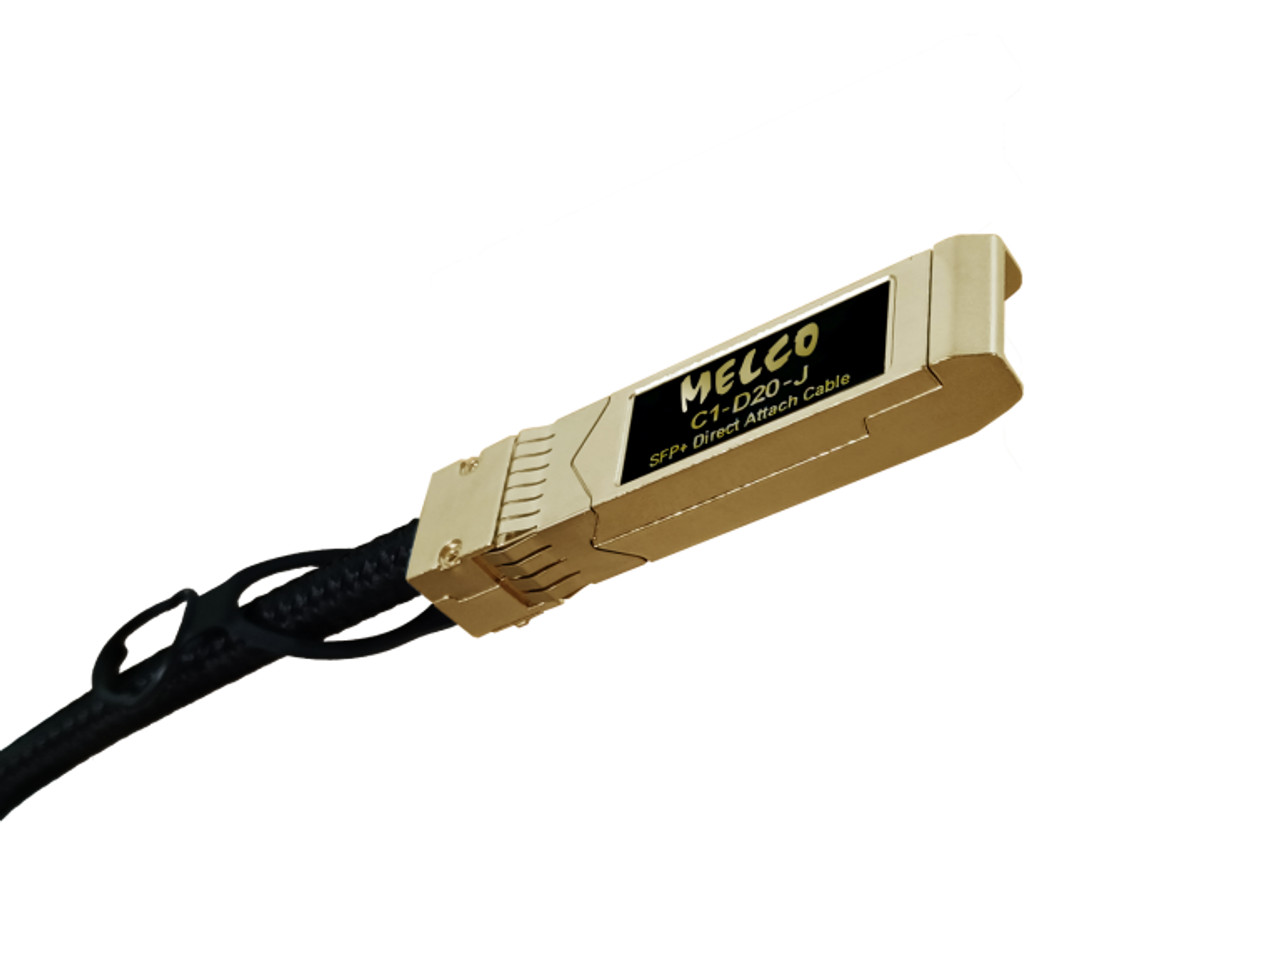 MELCO - C1-D20 - SPF+ DIRECT ATTACH NETWORK CABLE